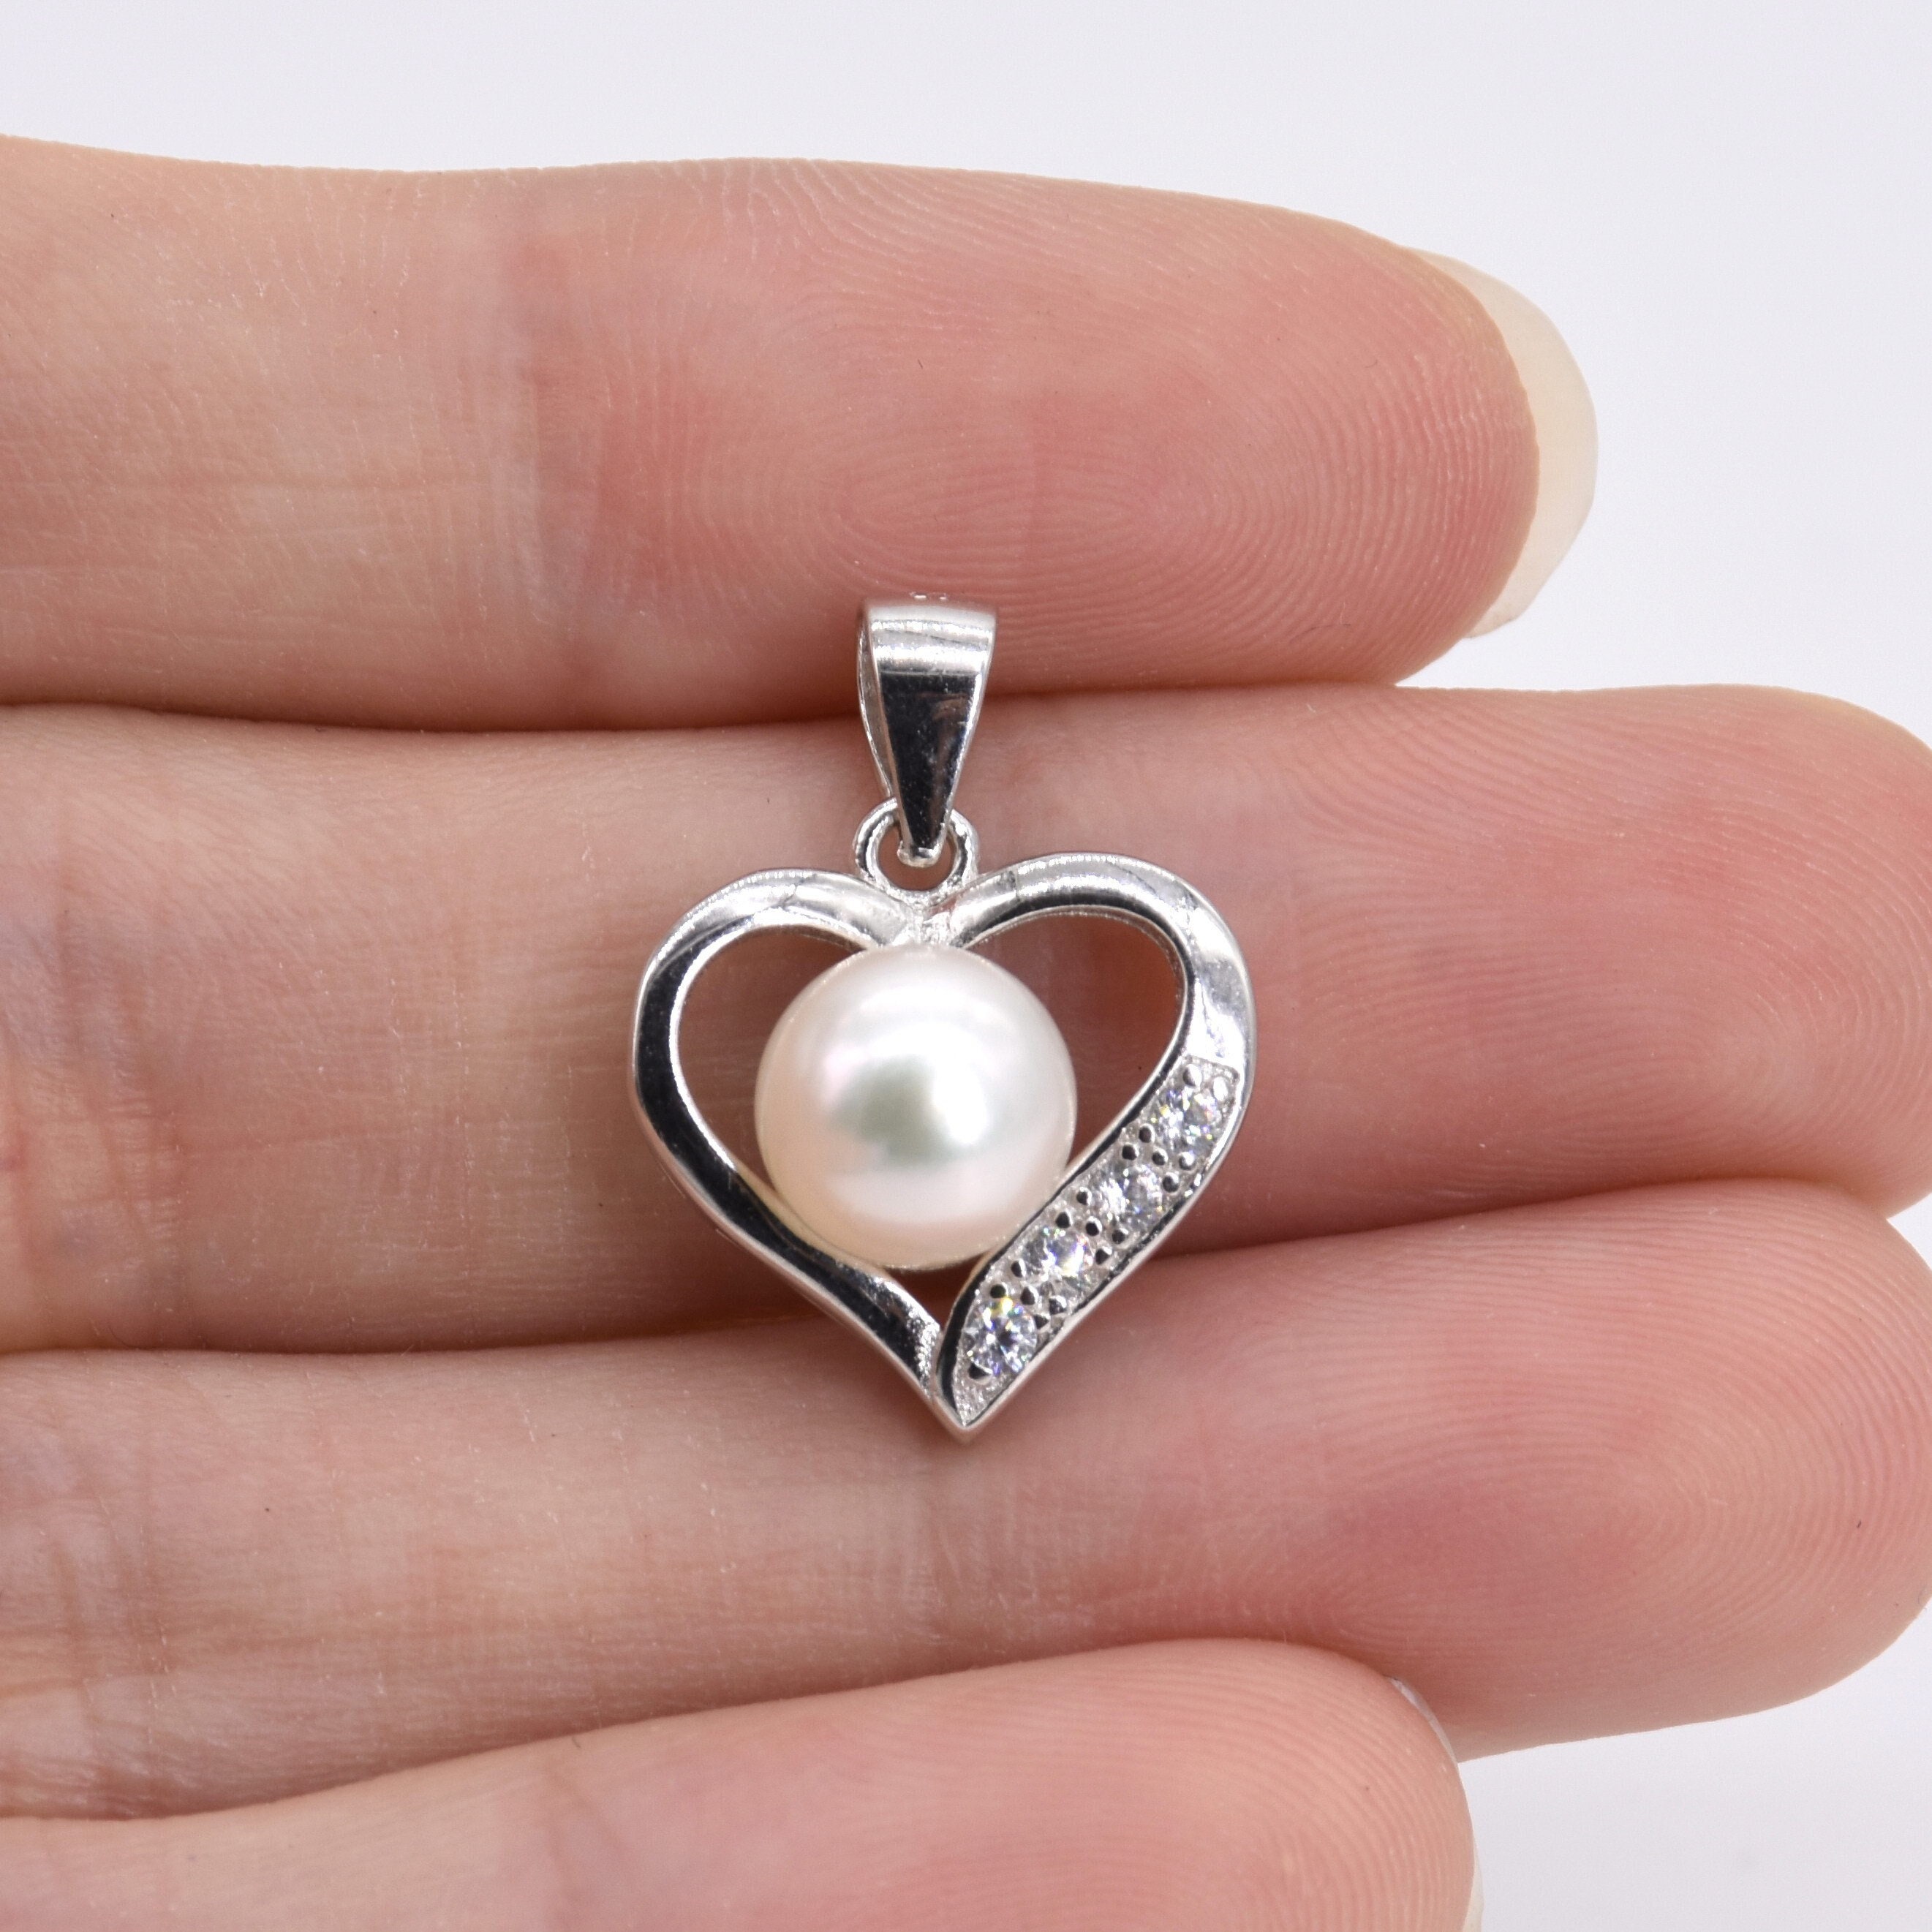 Pearl Cage Pendant, Sterling Silver Pearl Cage, Lotus Flower Pearl Cage Necklace, Wish Pearl Pendant, White Real Pearl Charm, F3000-P